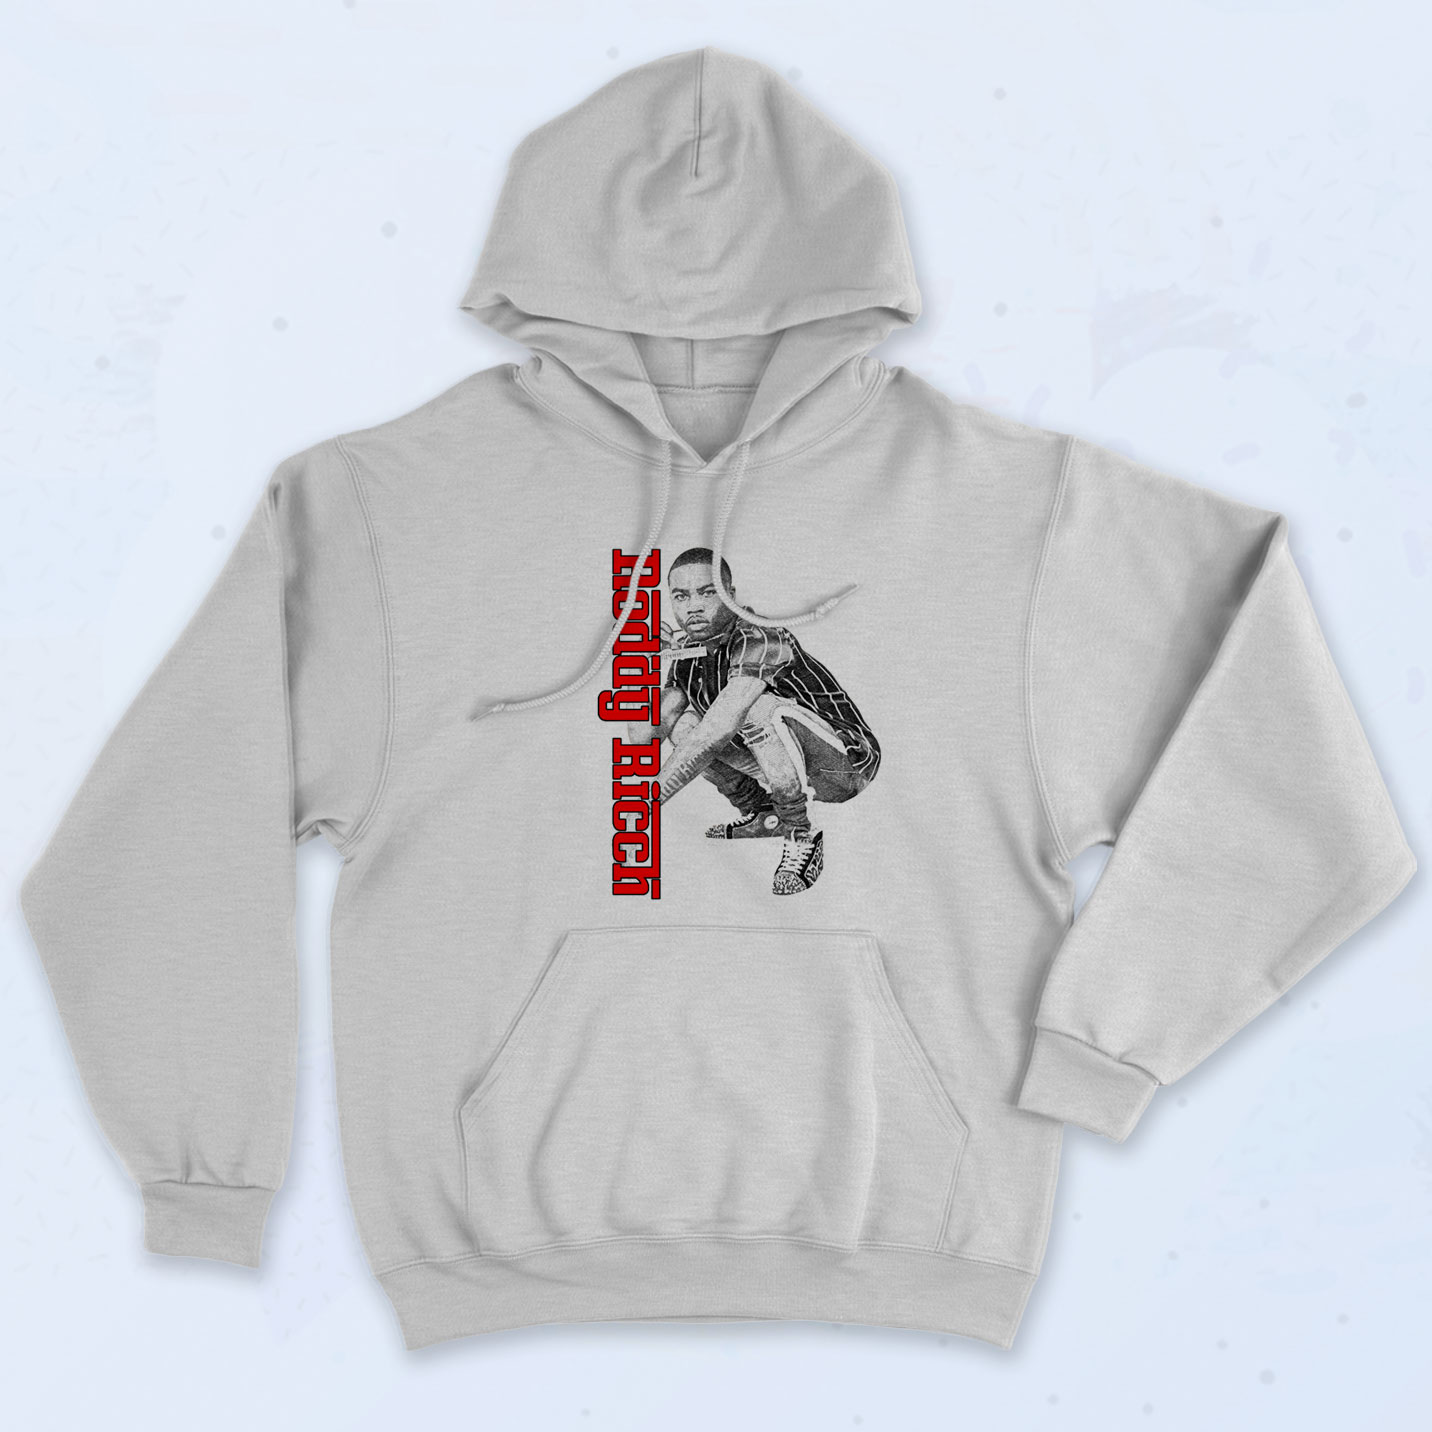 Roddy Ricch Rapper Photos Hoodie On Sale - 90sclothes.com